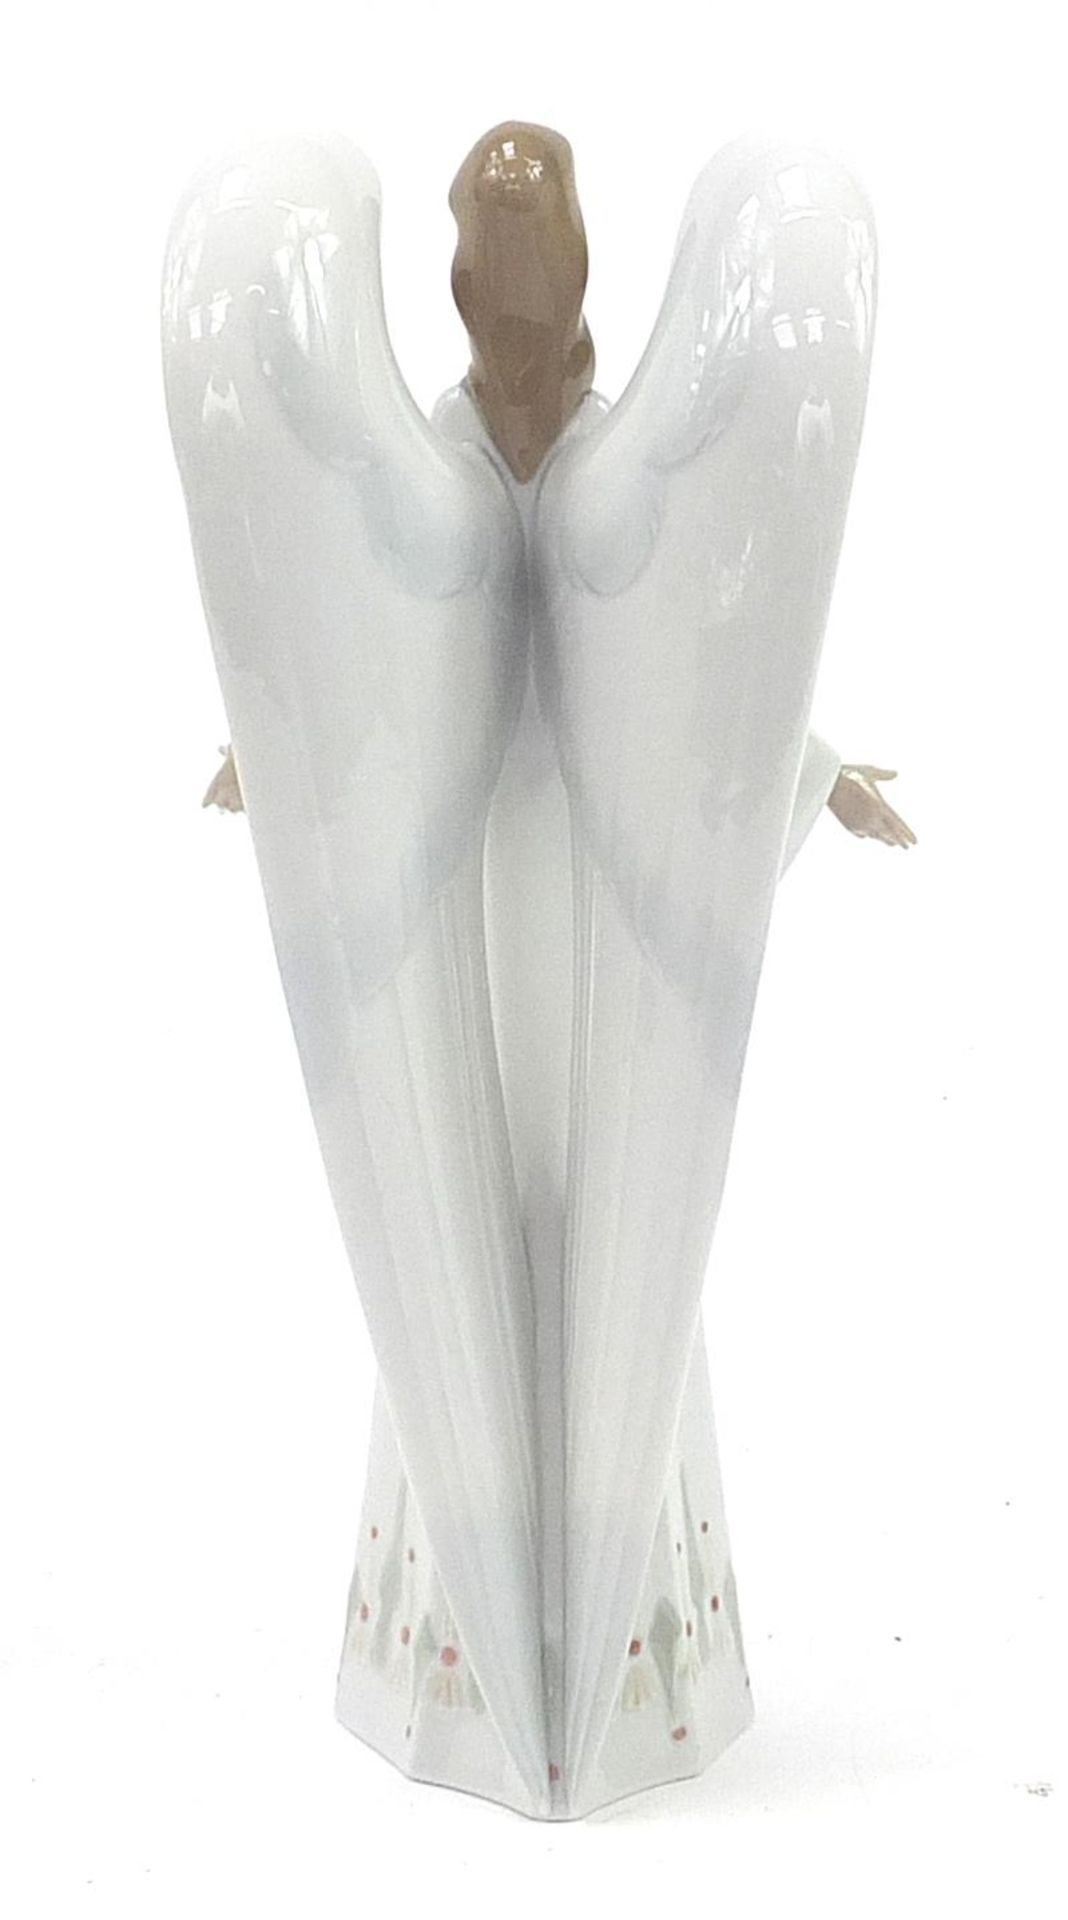 Nao figurine of an angel numbered 1273, with box, 31cm high - Image 3 of 5